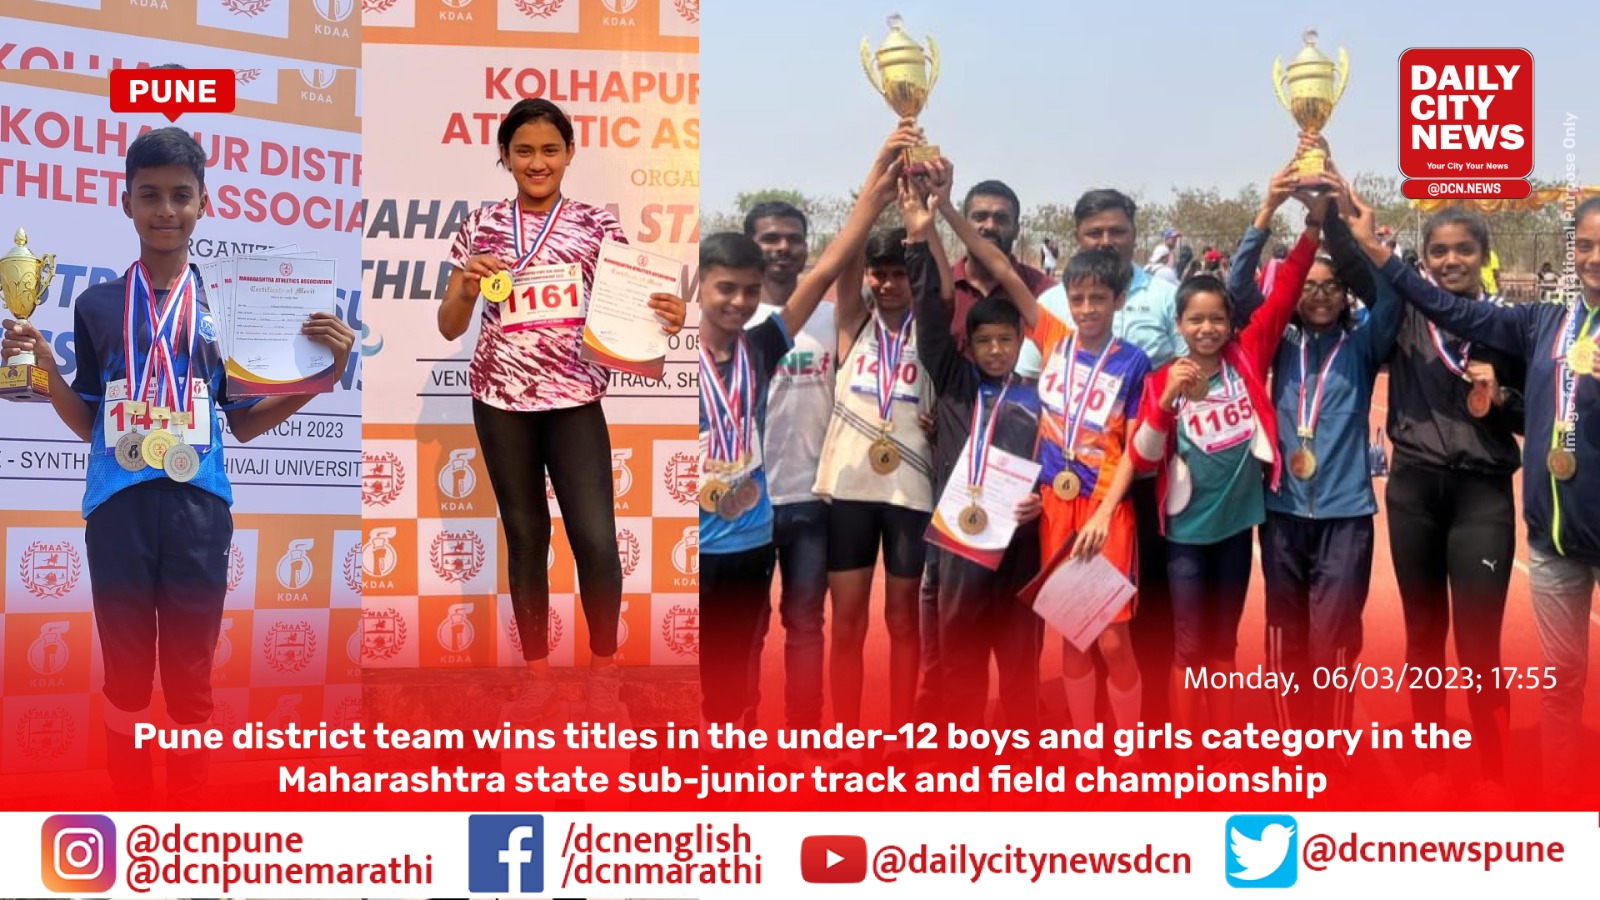 Pune district team wins titles in the under-12 boys and girls category in the Maharashtra state sub-junior track and field championship